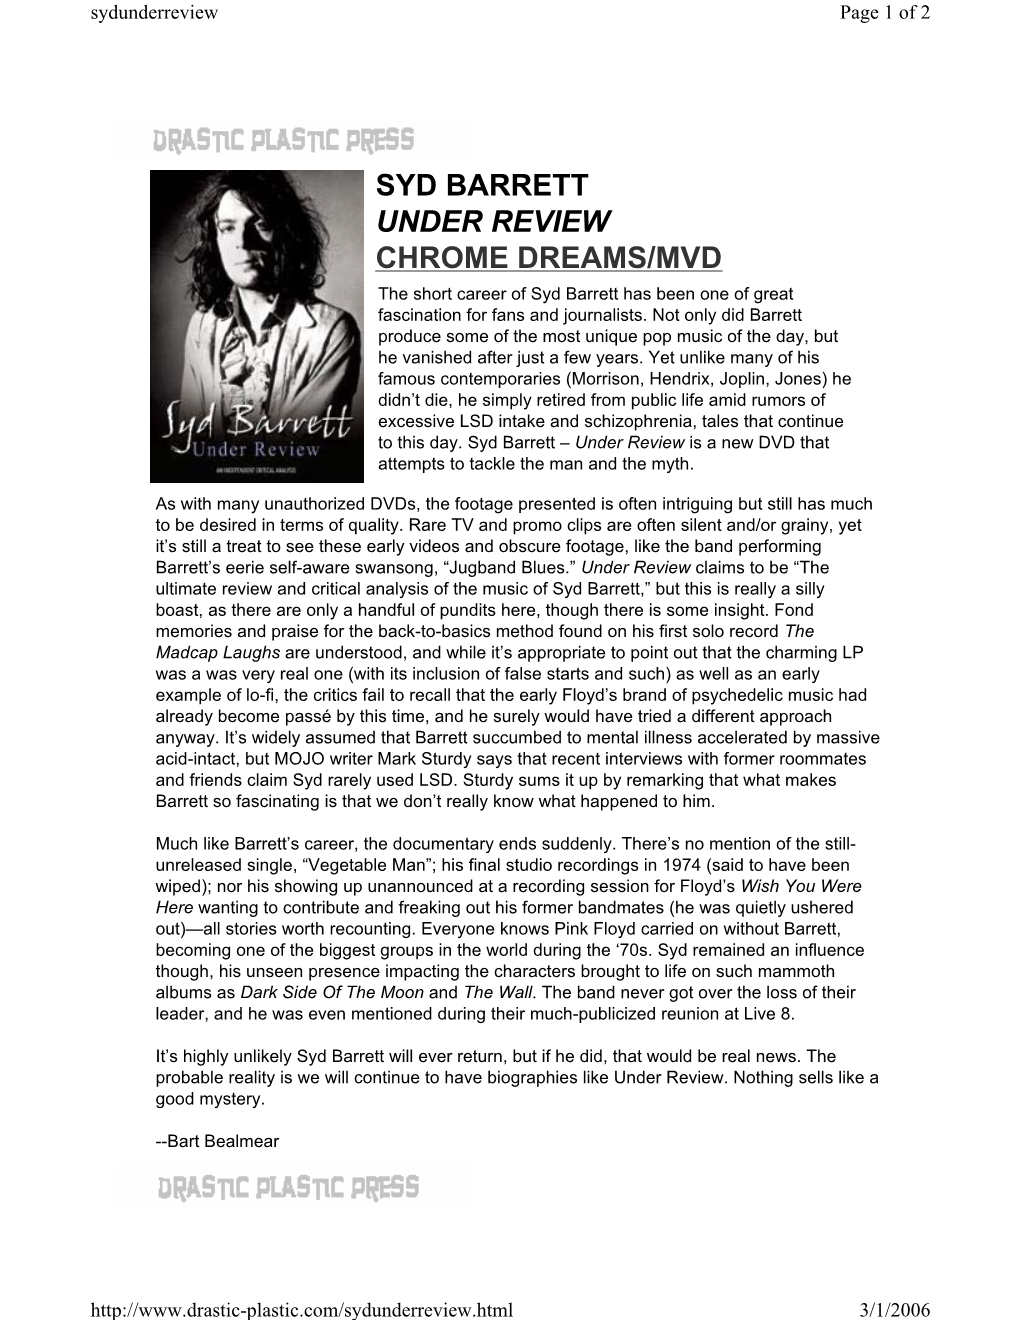 SYD BARRETT UNDER REVIEW CHROME DREAMS/MVD the Short Career of Syd Barrett Has Been One of Great Fascination for Fans and Journalists